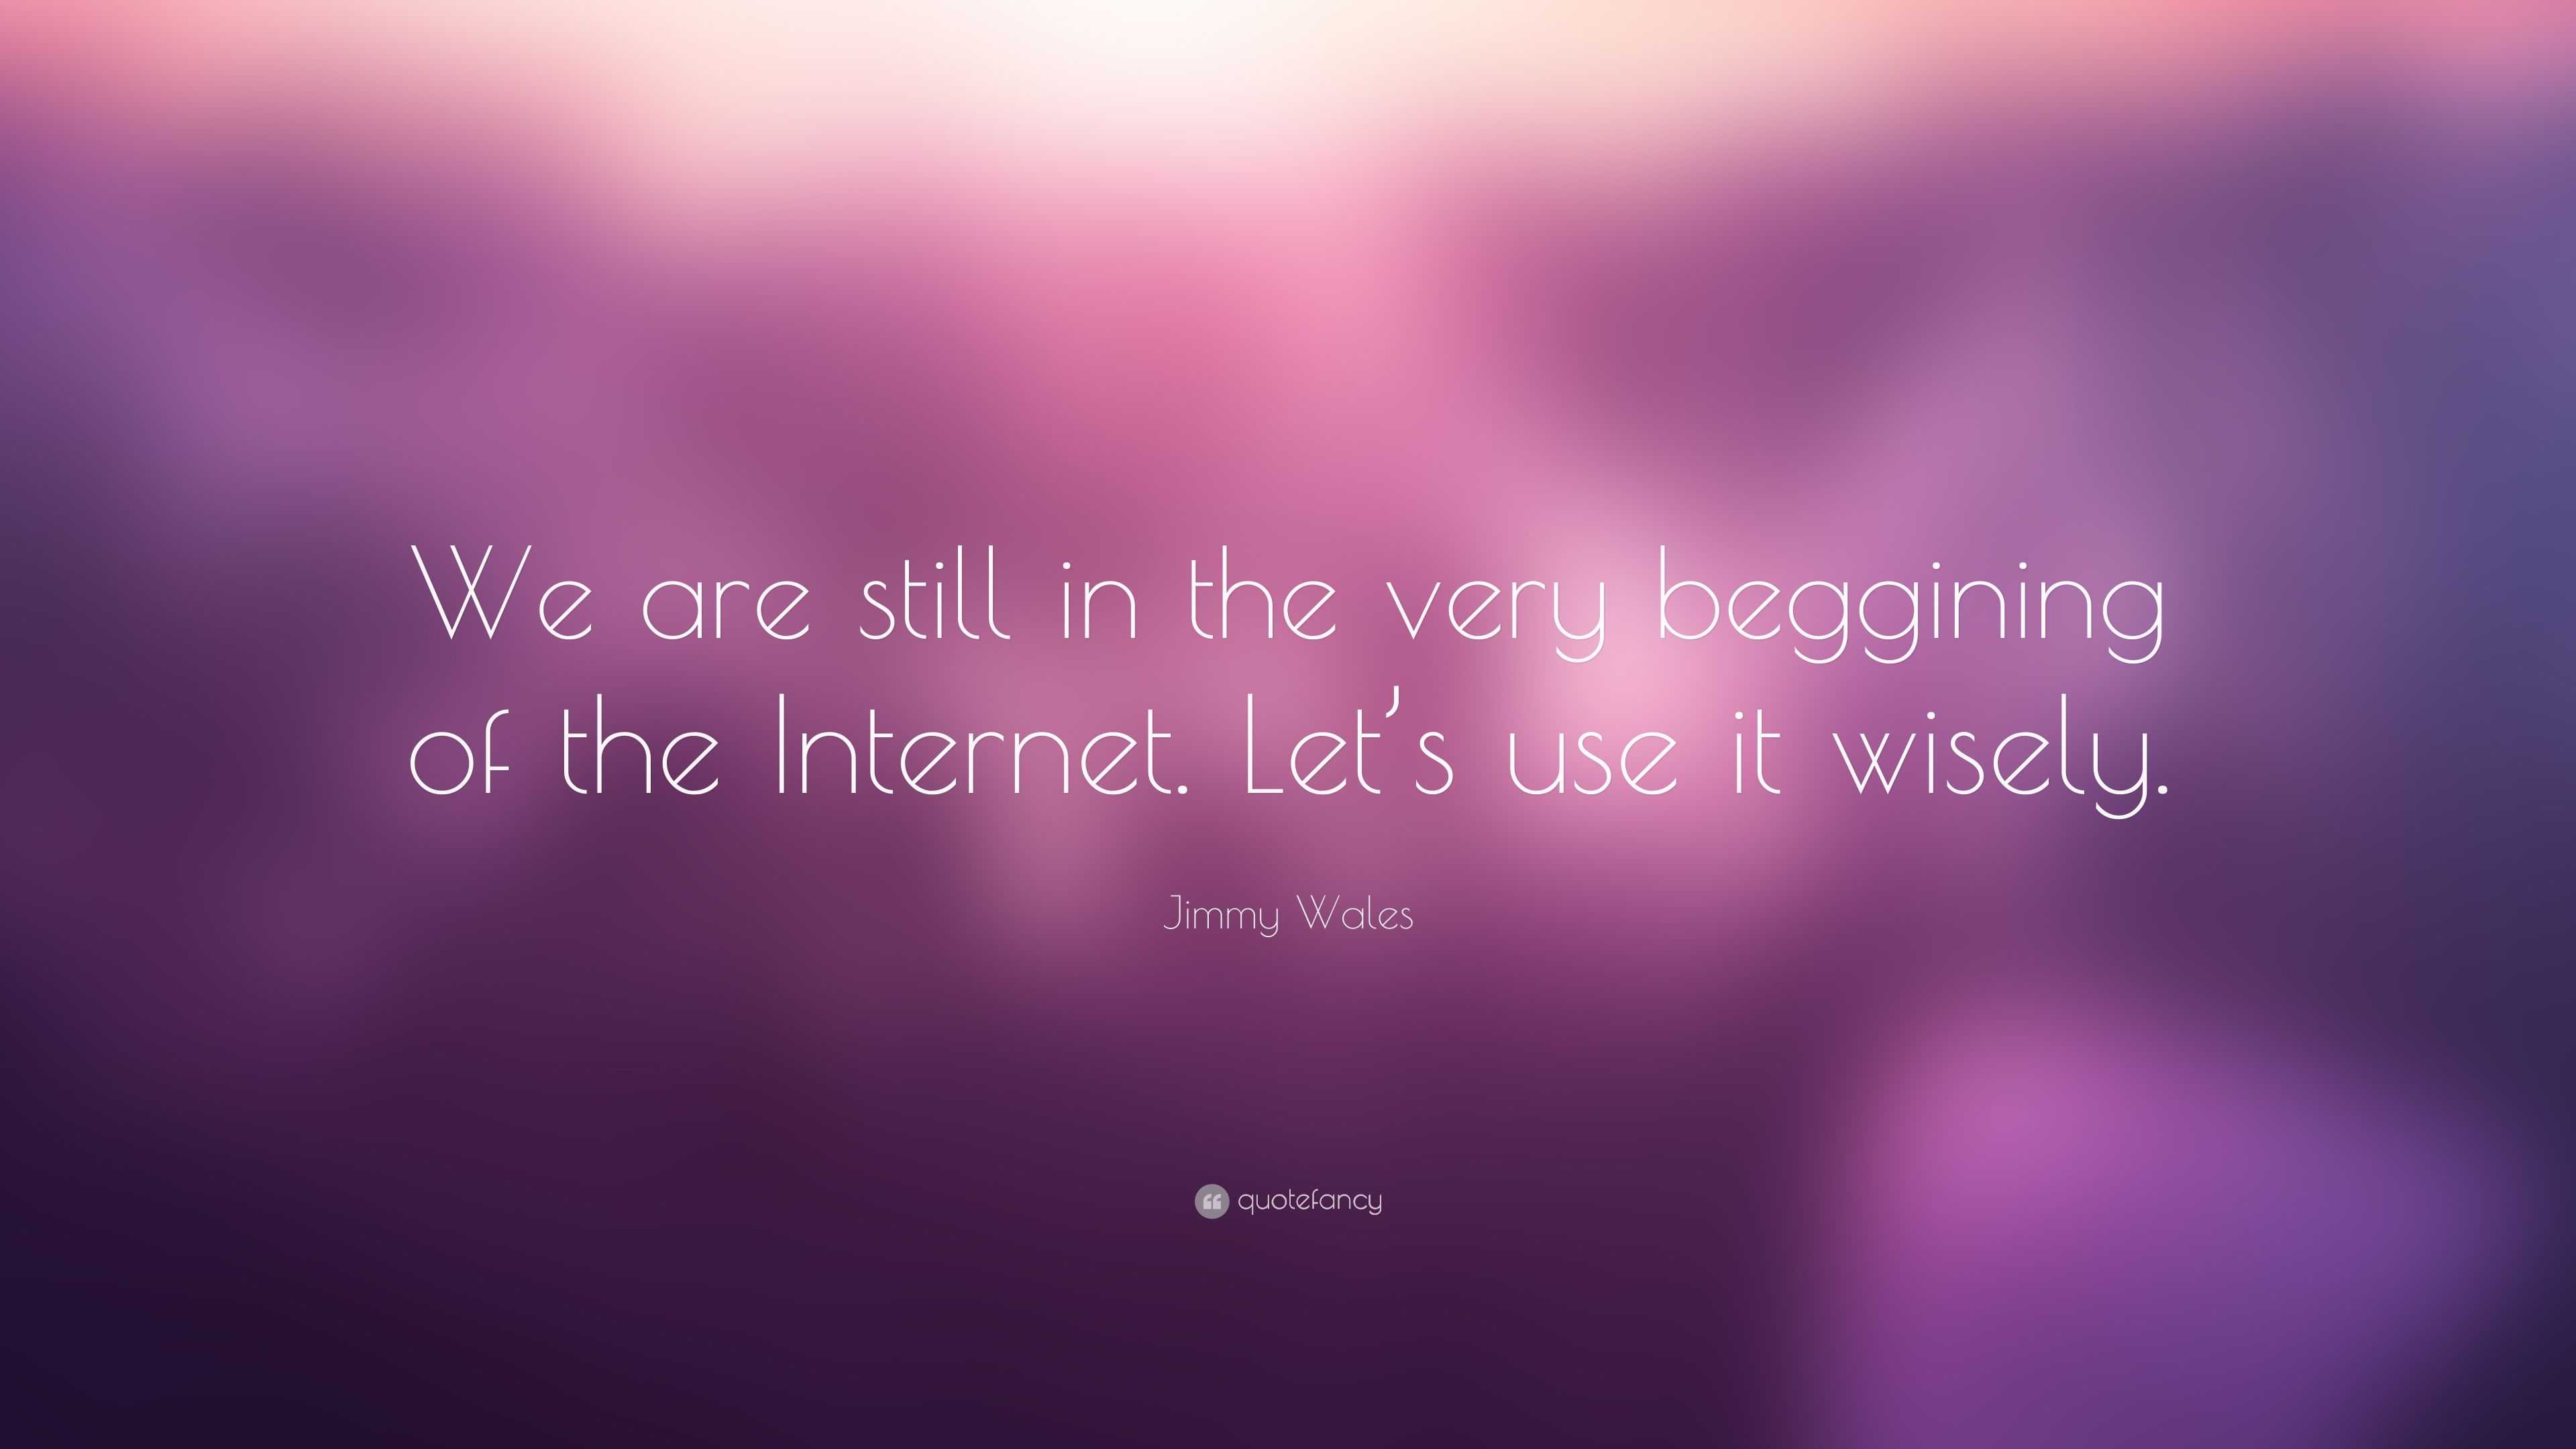 Jimmy Wales Quote: “We are still in the very beggining of the Internet